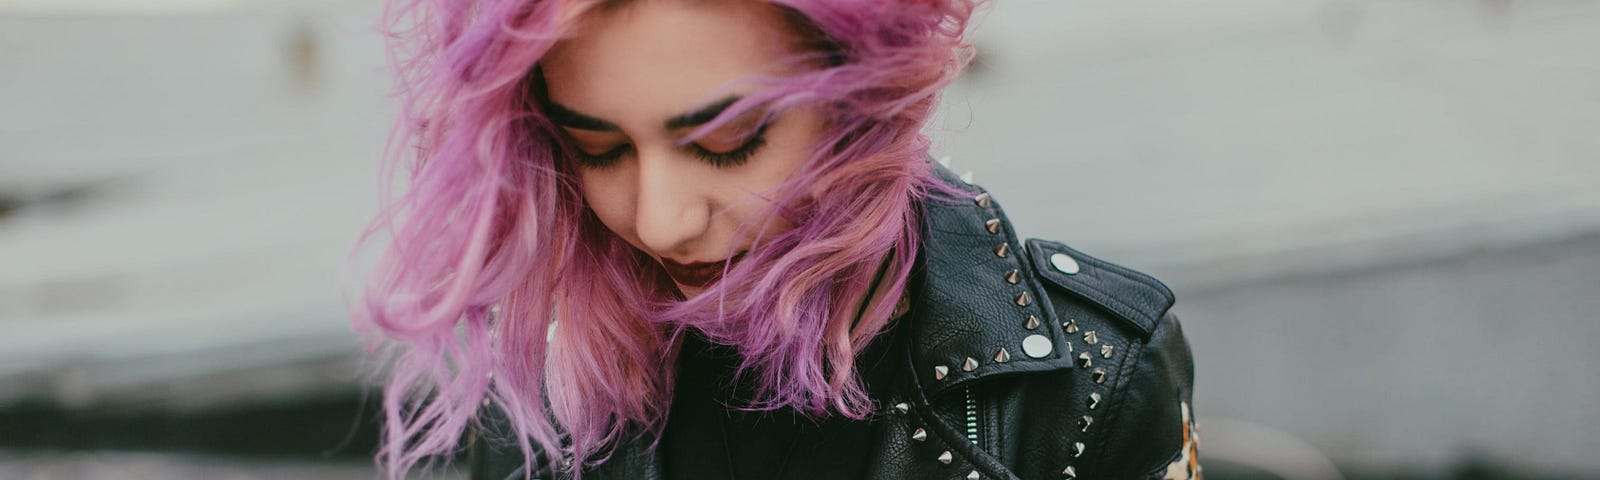 A girl with pink hair